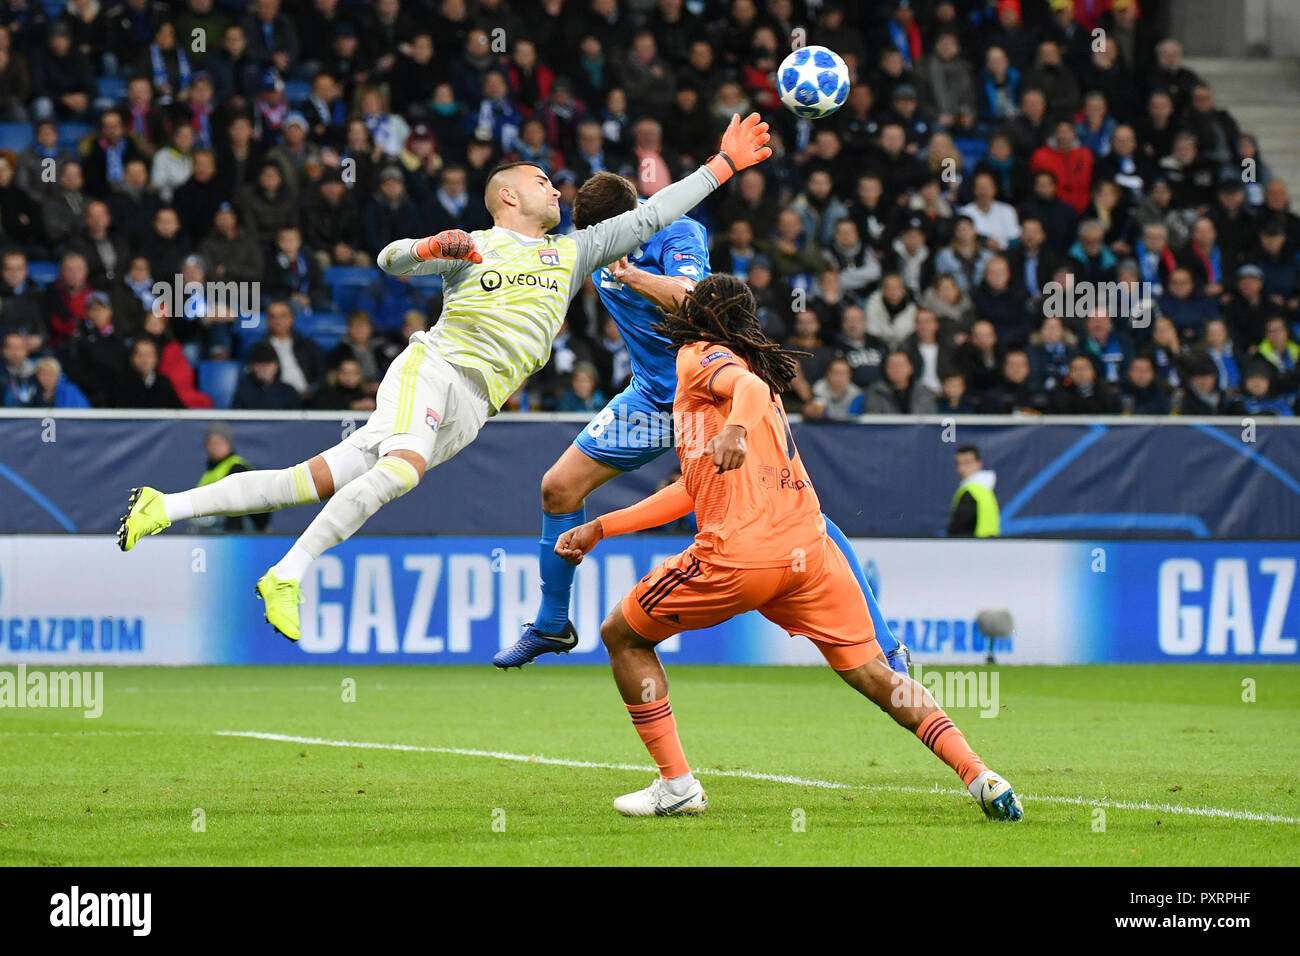 Hoffenheim, Germany. 23rd Oct, 2018. Anthony Lopes (L), goalkeeper of Lyon fights for the ball during the UEFA Champions League group F match between Hoffenheim and Lyon at Rhein-Neckar-Arena in Sinsheim, Germany, on Oct. 23, 2018. The match ended 3-3. Credit: Ulrich Hufnagel/Xinhua/Alamy Live News Stock Photo